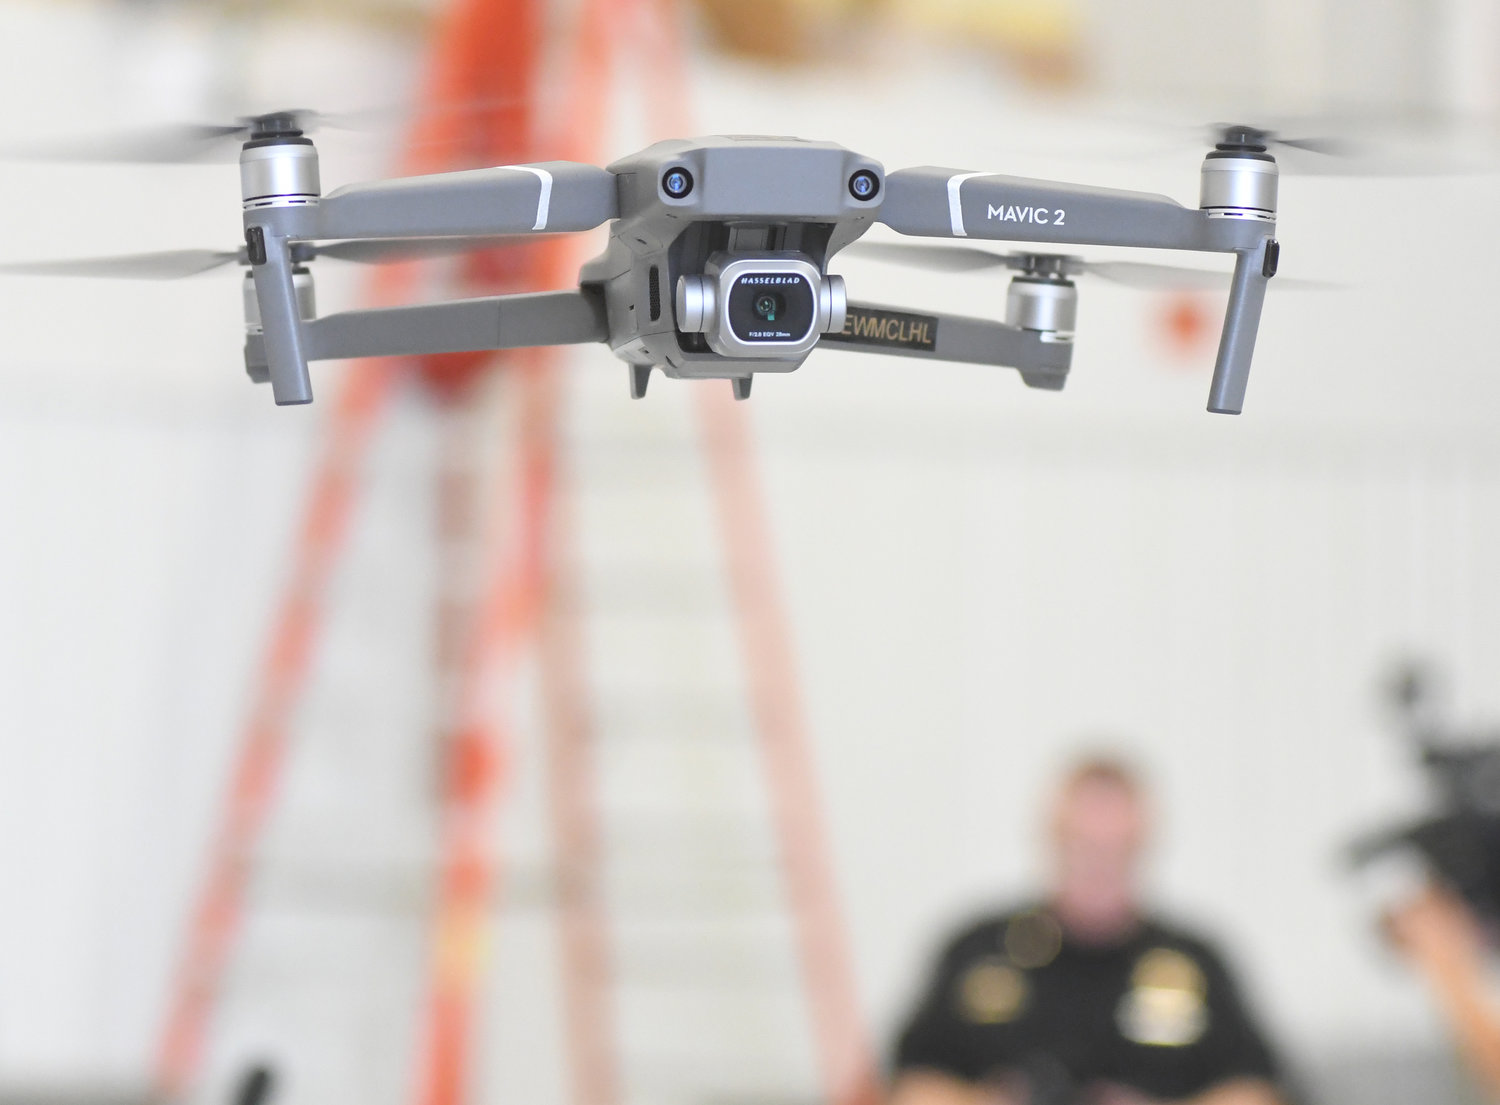 UP, UP AND AWAY — A Mavic Pro drone hovers a few feet above ground as part of Sheriff Robert M. Maciol’s new drone unit rollout this morning. This battery-powered camera drone is one of eight in the new fleet, and costs about $1,000.